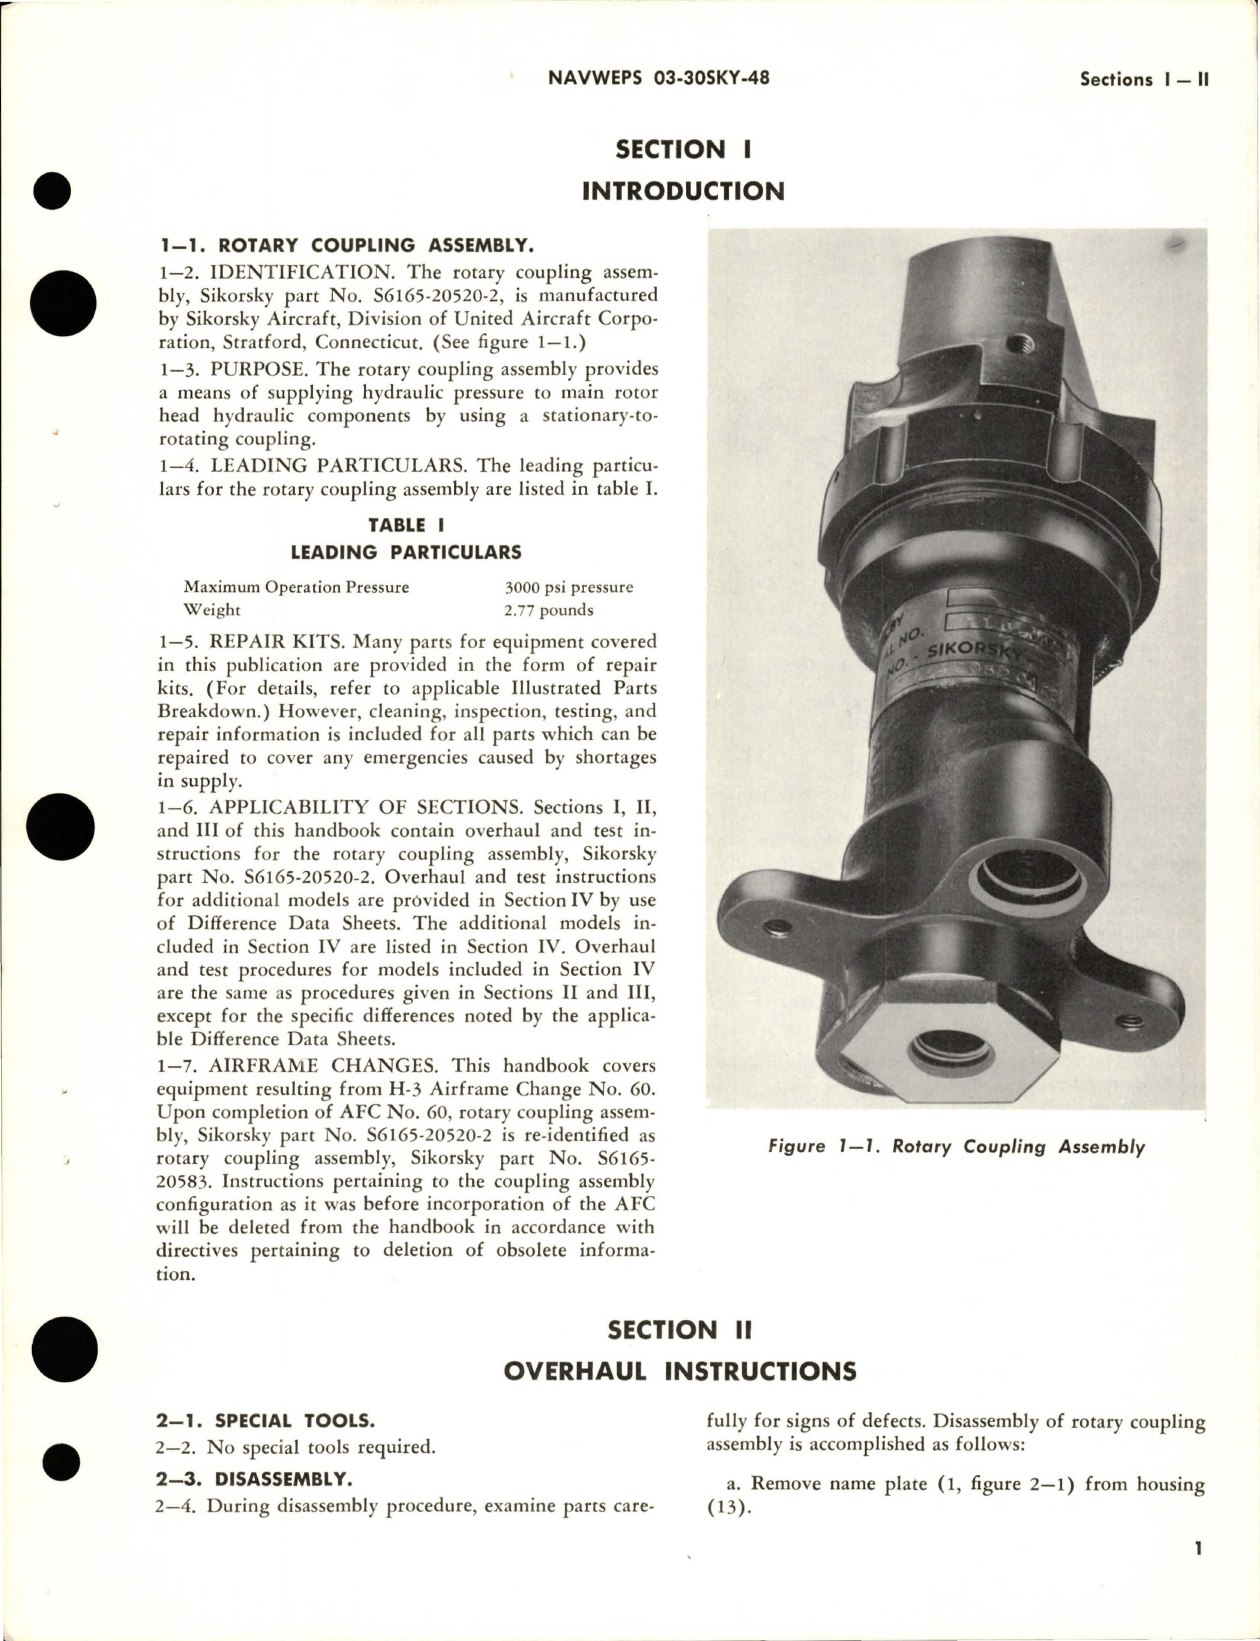 Sample page 5 from AirCorps Library document: Overhaul Instructions for Rotary Coupling Assembly - Parts S6165-20520-2 and S6165-20583 